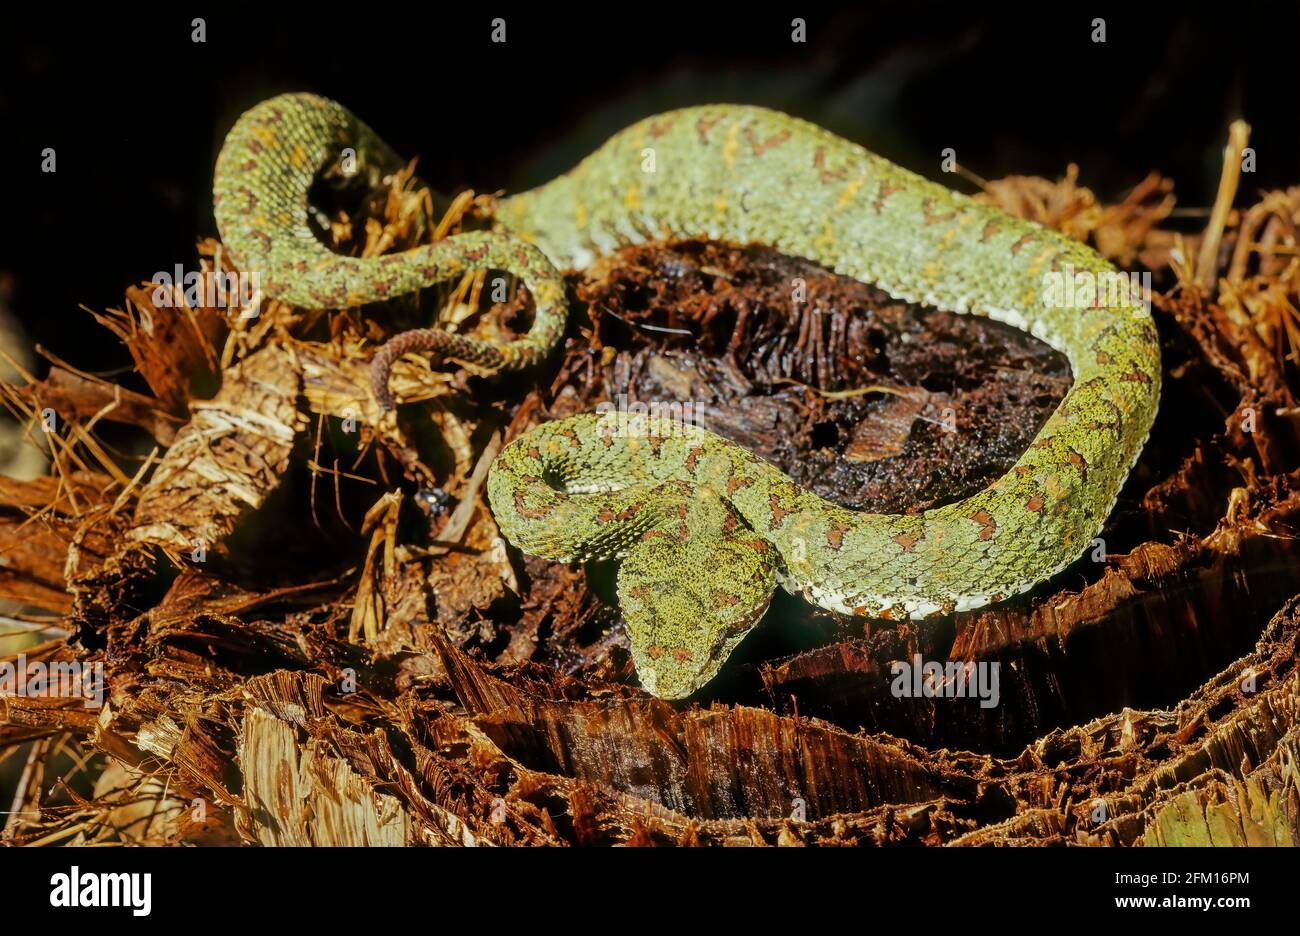 Bothriechis schlegelii, known commonly as the eyelash viper, is a species of venomous pit viper in the family Viperidae. Stock Photo